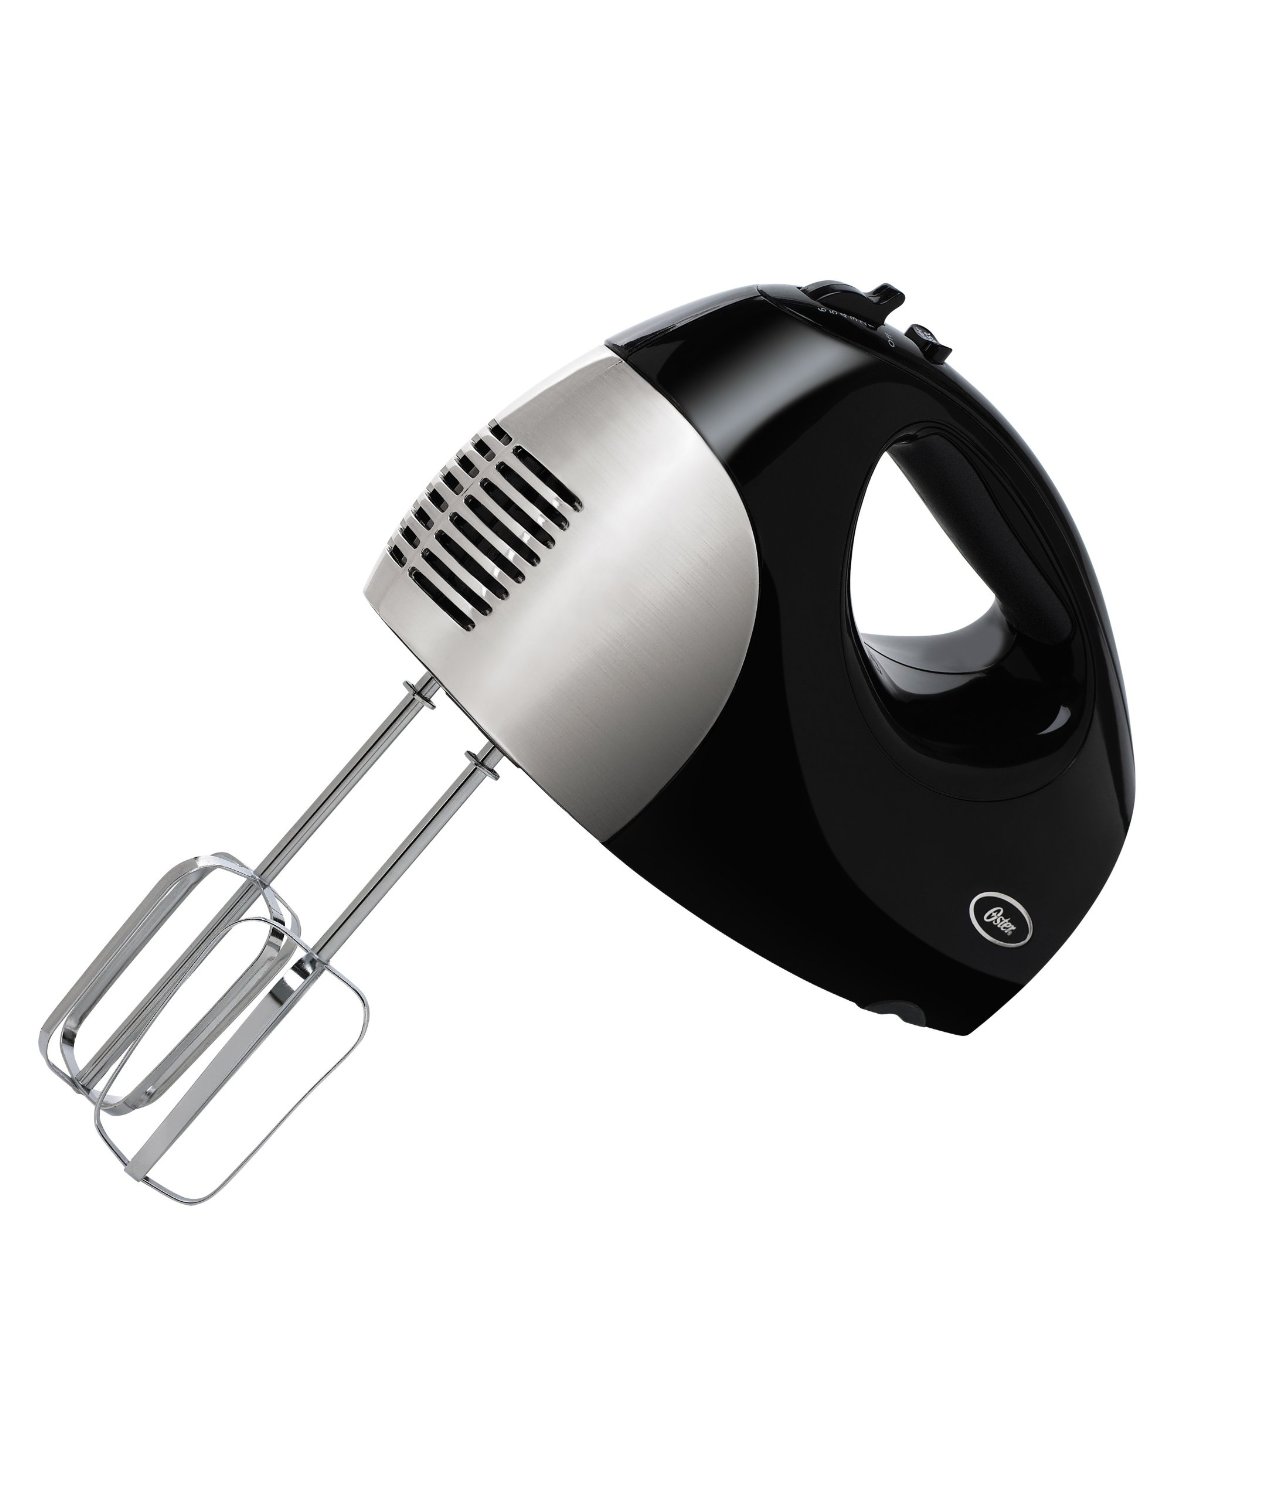 Oster 6Speed Hand Mixer with Retractable Cord 